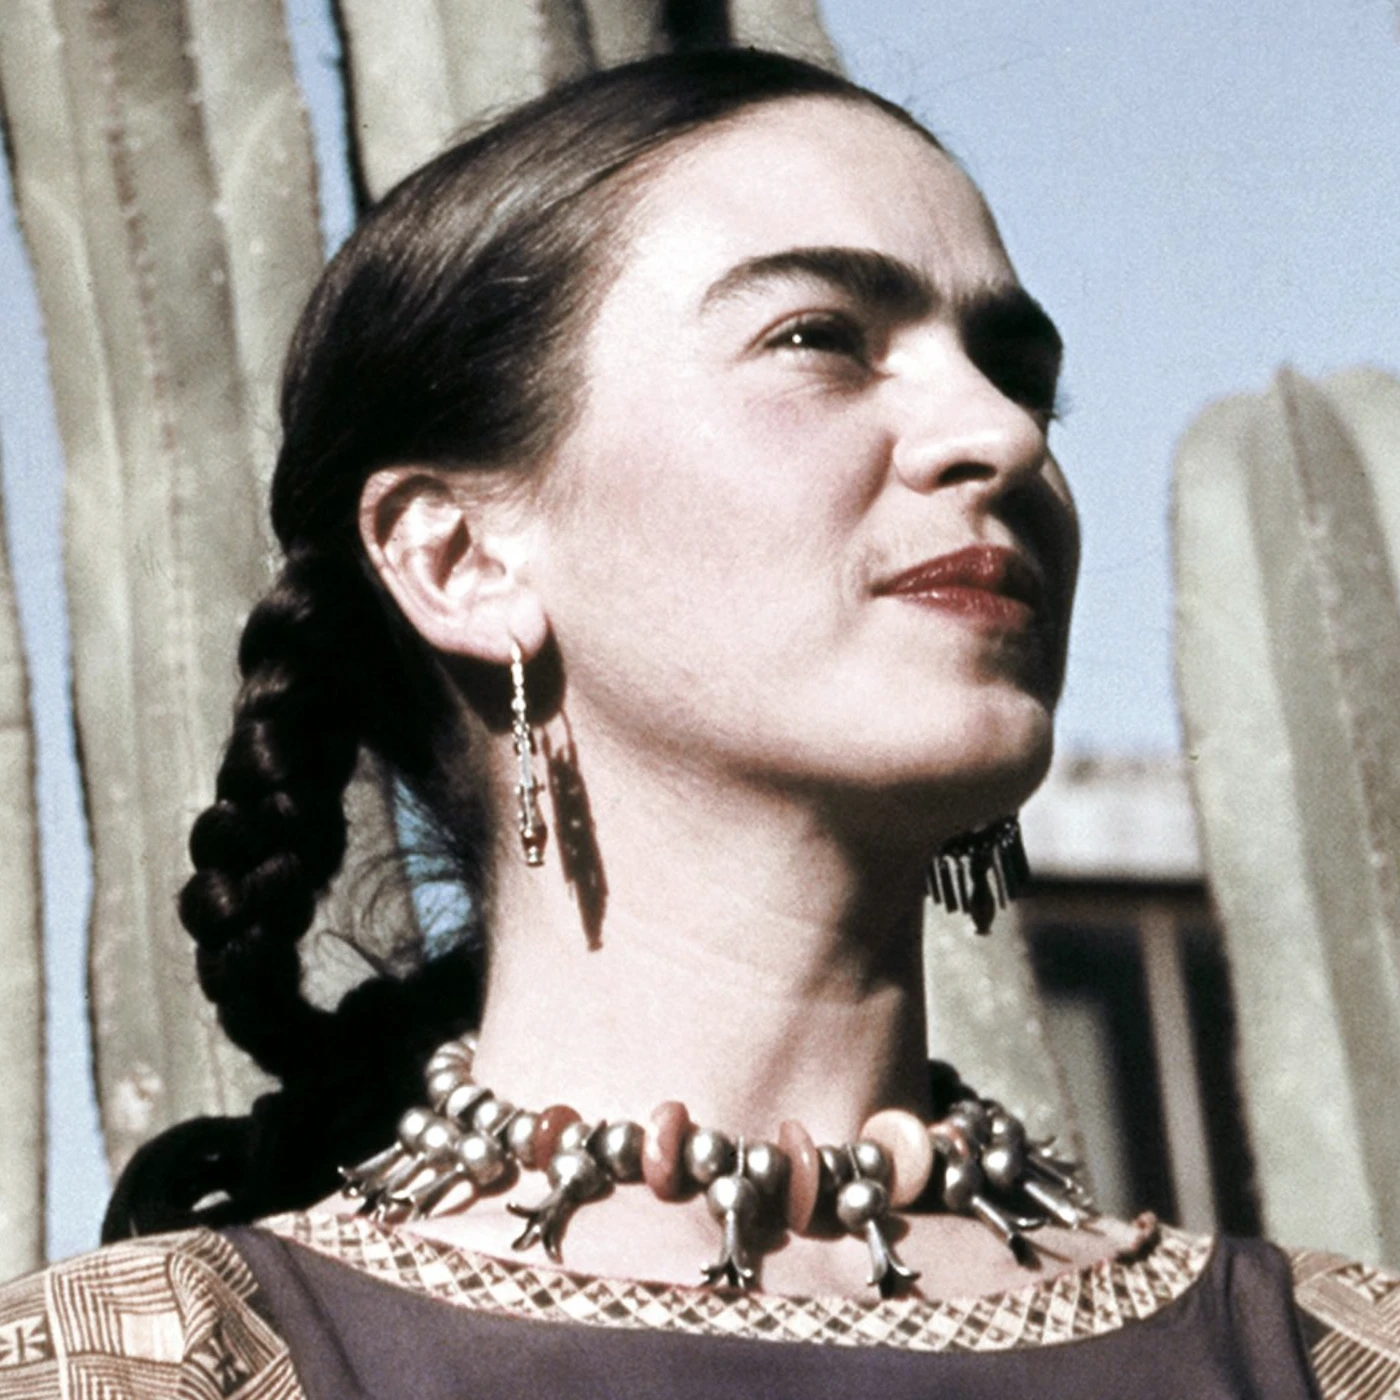 Frida Kahlo fans, a special event is coming to the V&A